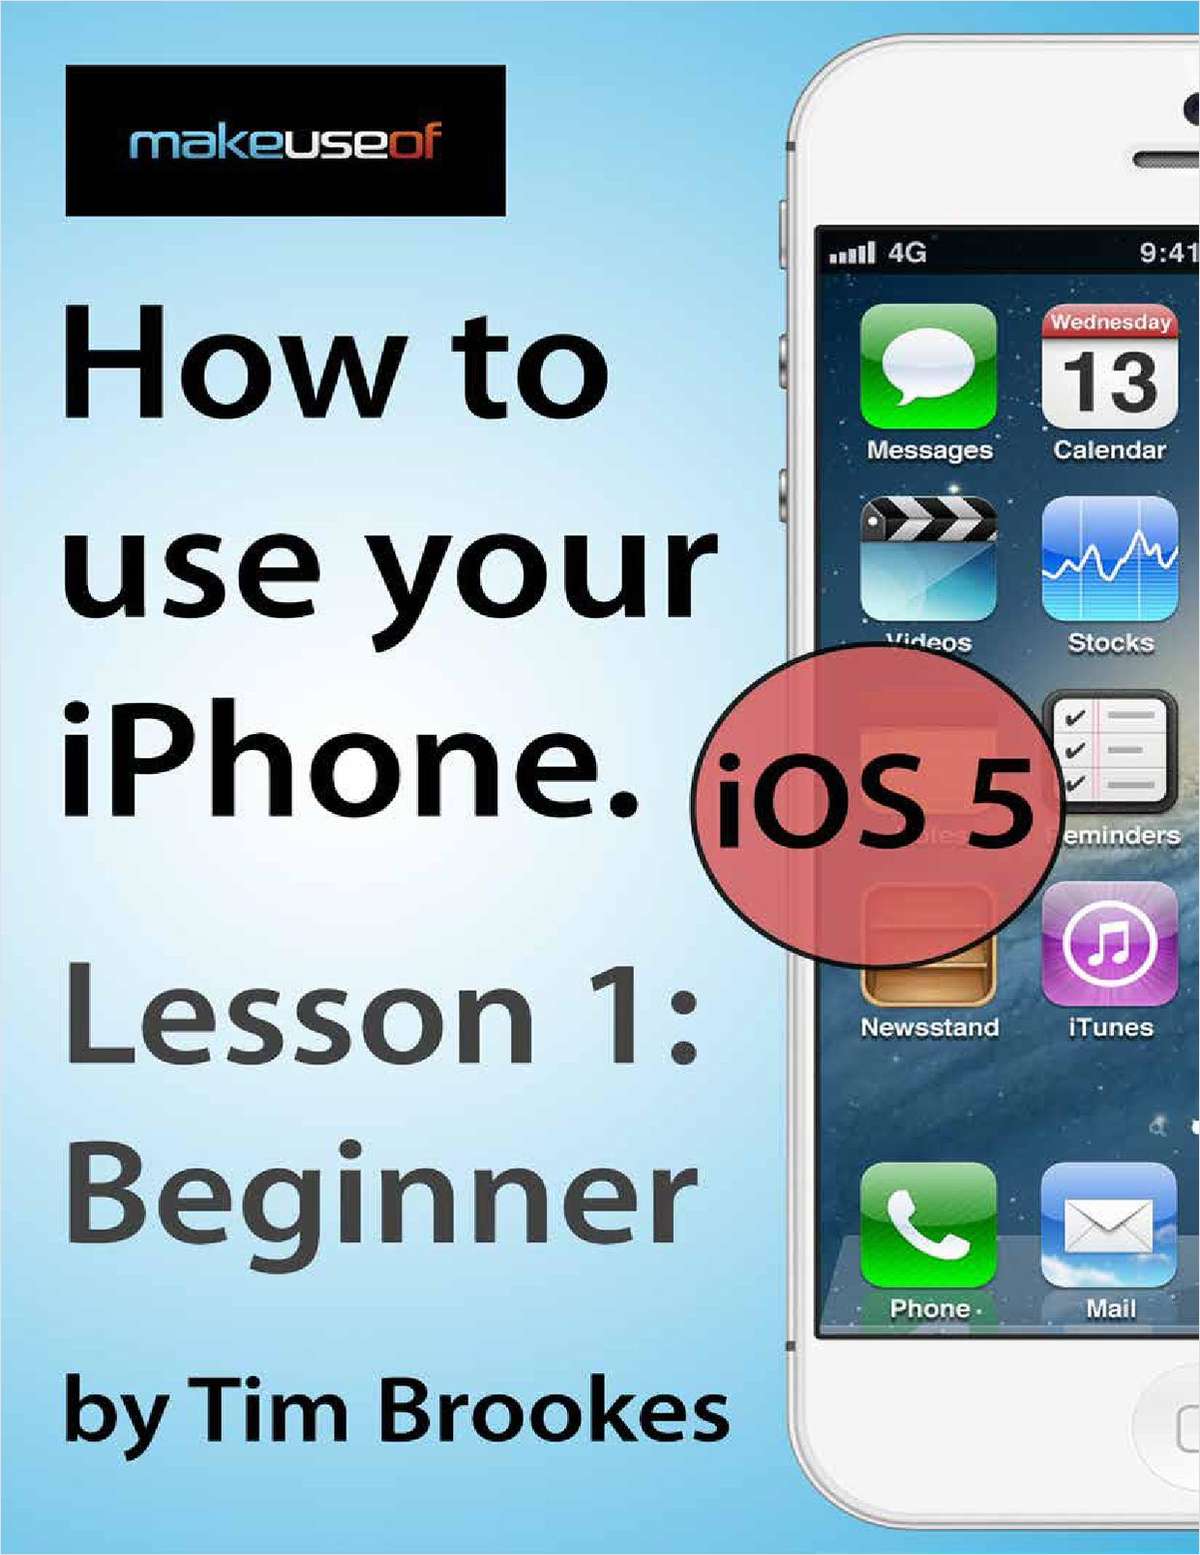 How To Use Your iPhone iOS5: Lesson 1 Beginner